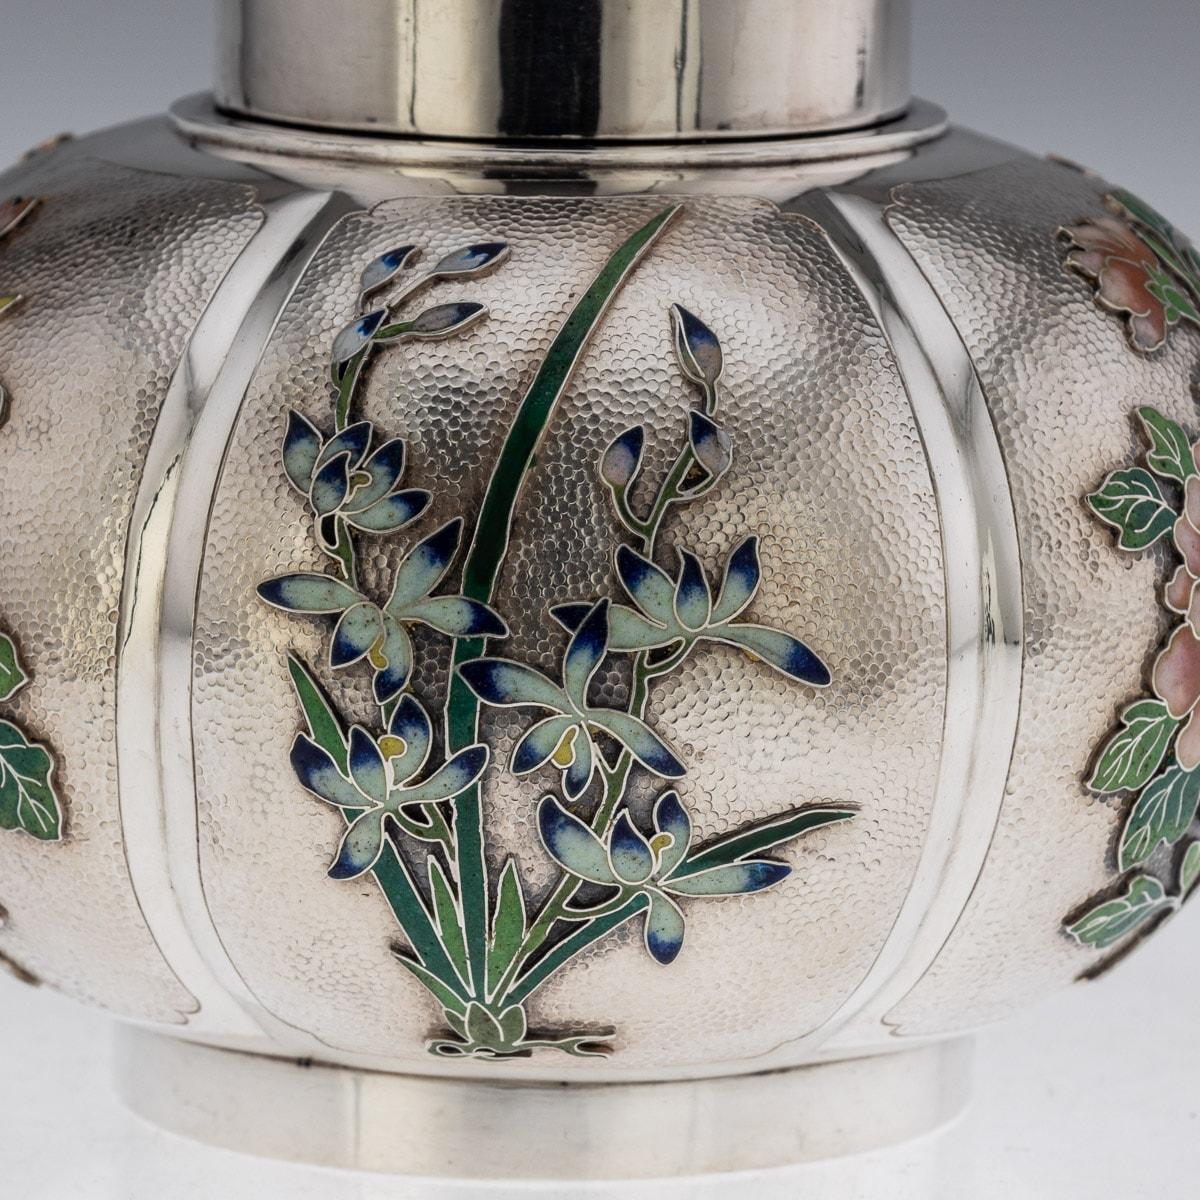 20th Century Chinese Export Solid Silver & Enamel Tea Caddy, Luen Wo, c.1900 10